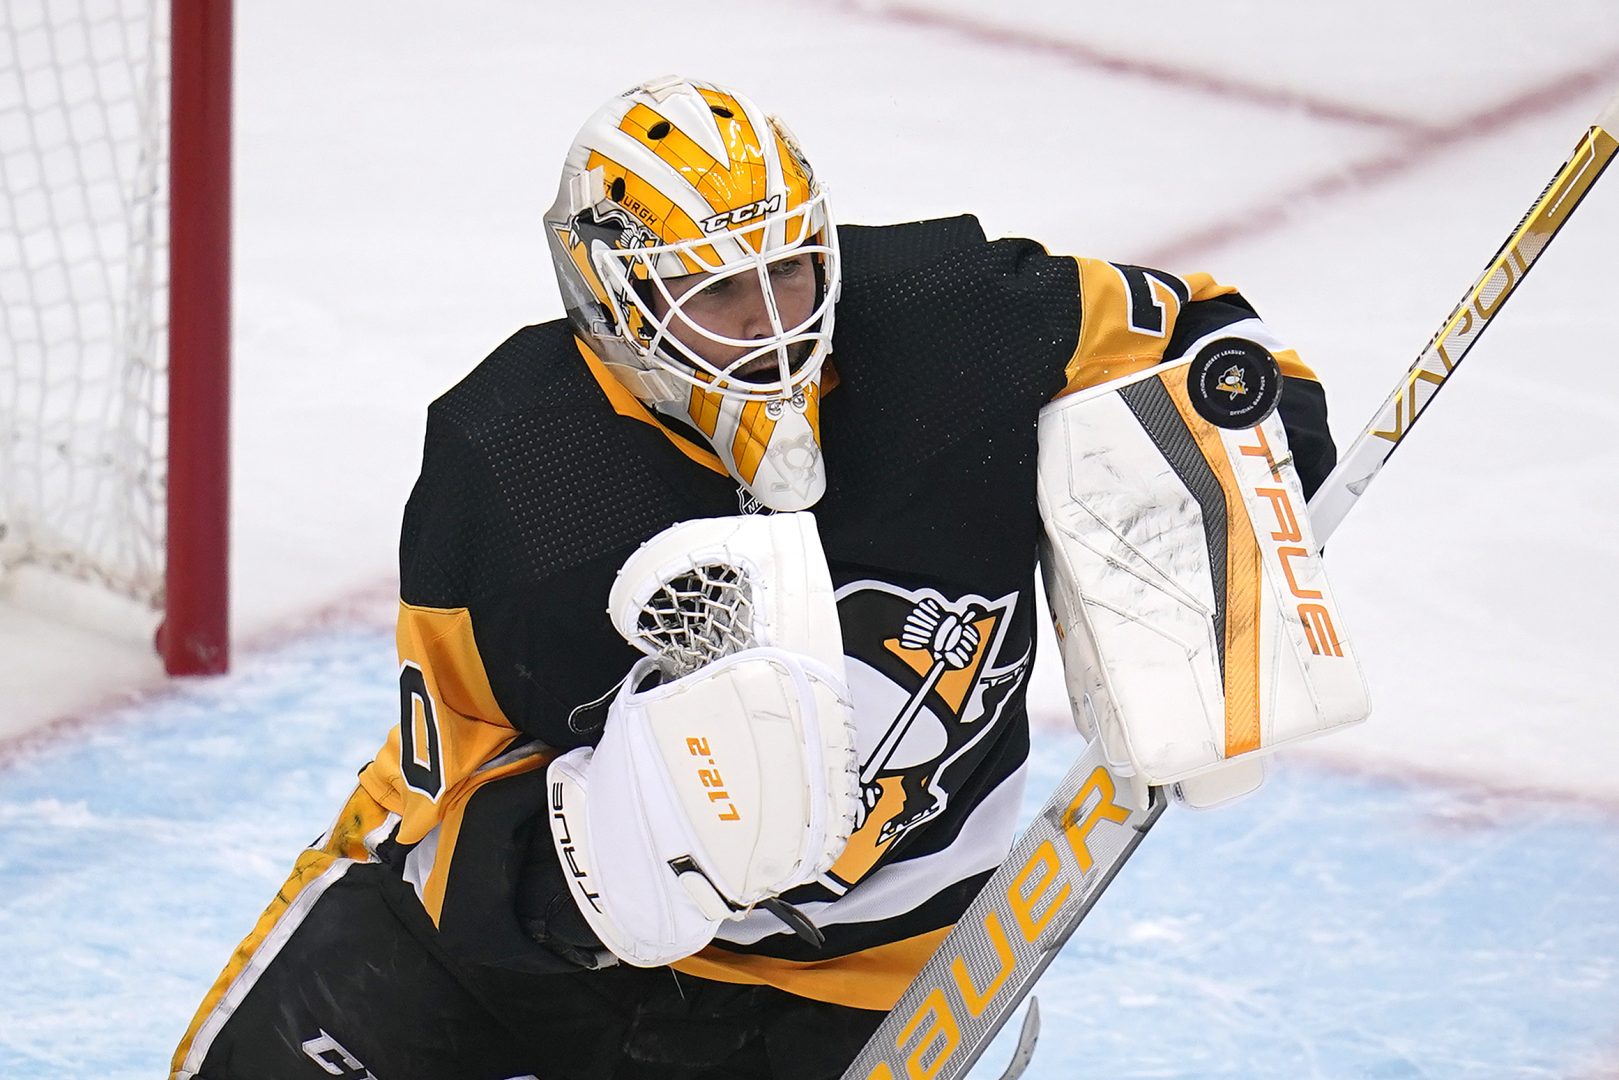 Pittsburgh Penguins goaltender Louis Domingue blocks a shot during the first period in Game 3 of an NHL hockey Stanley Cup first-round playoff series against the New York Rangers in Pittsburgh, Saturday, May 7, 2022. (AP Photo/Gene J. Puskar)